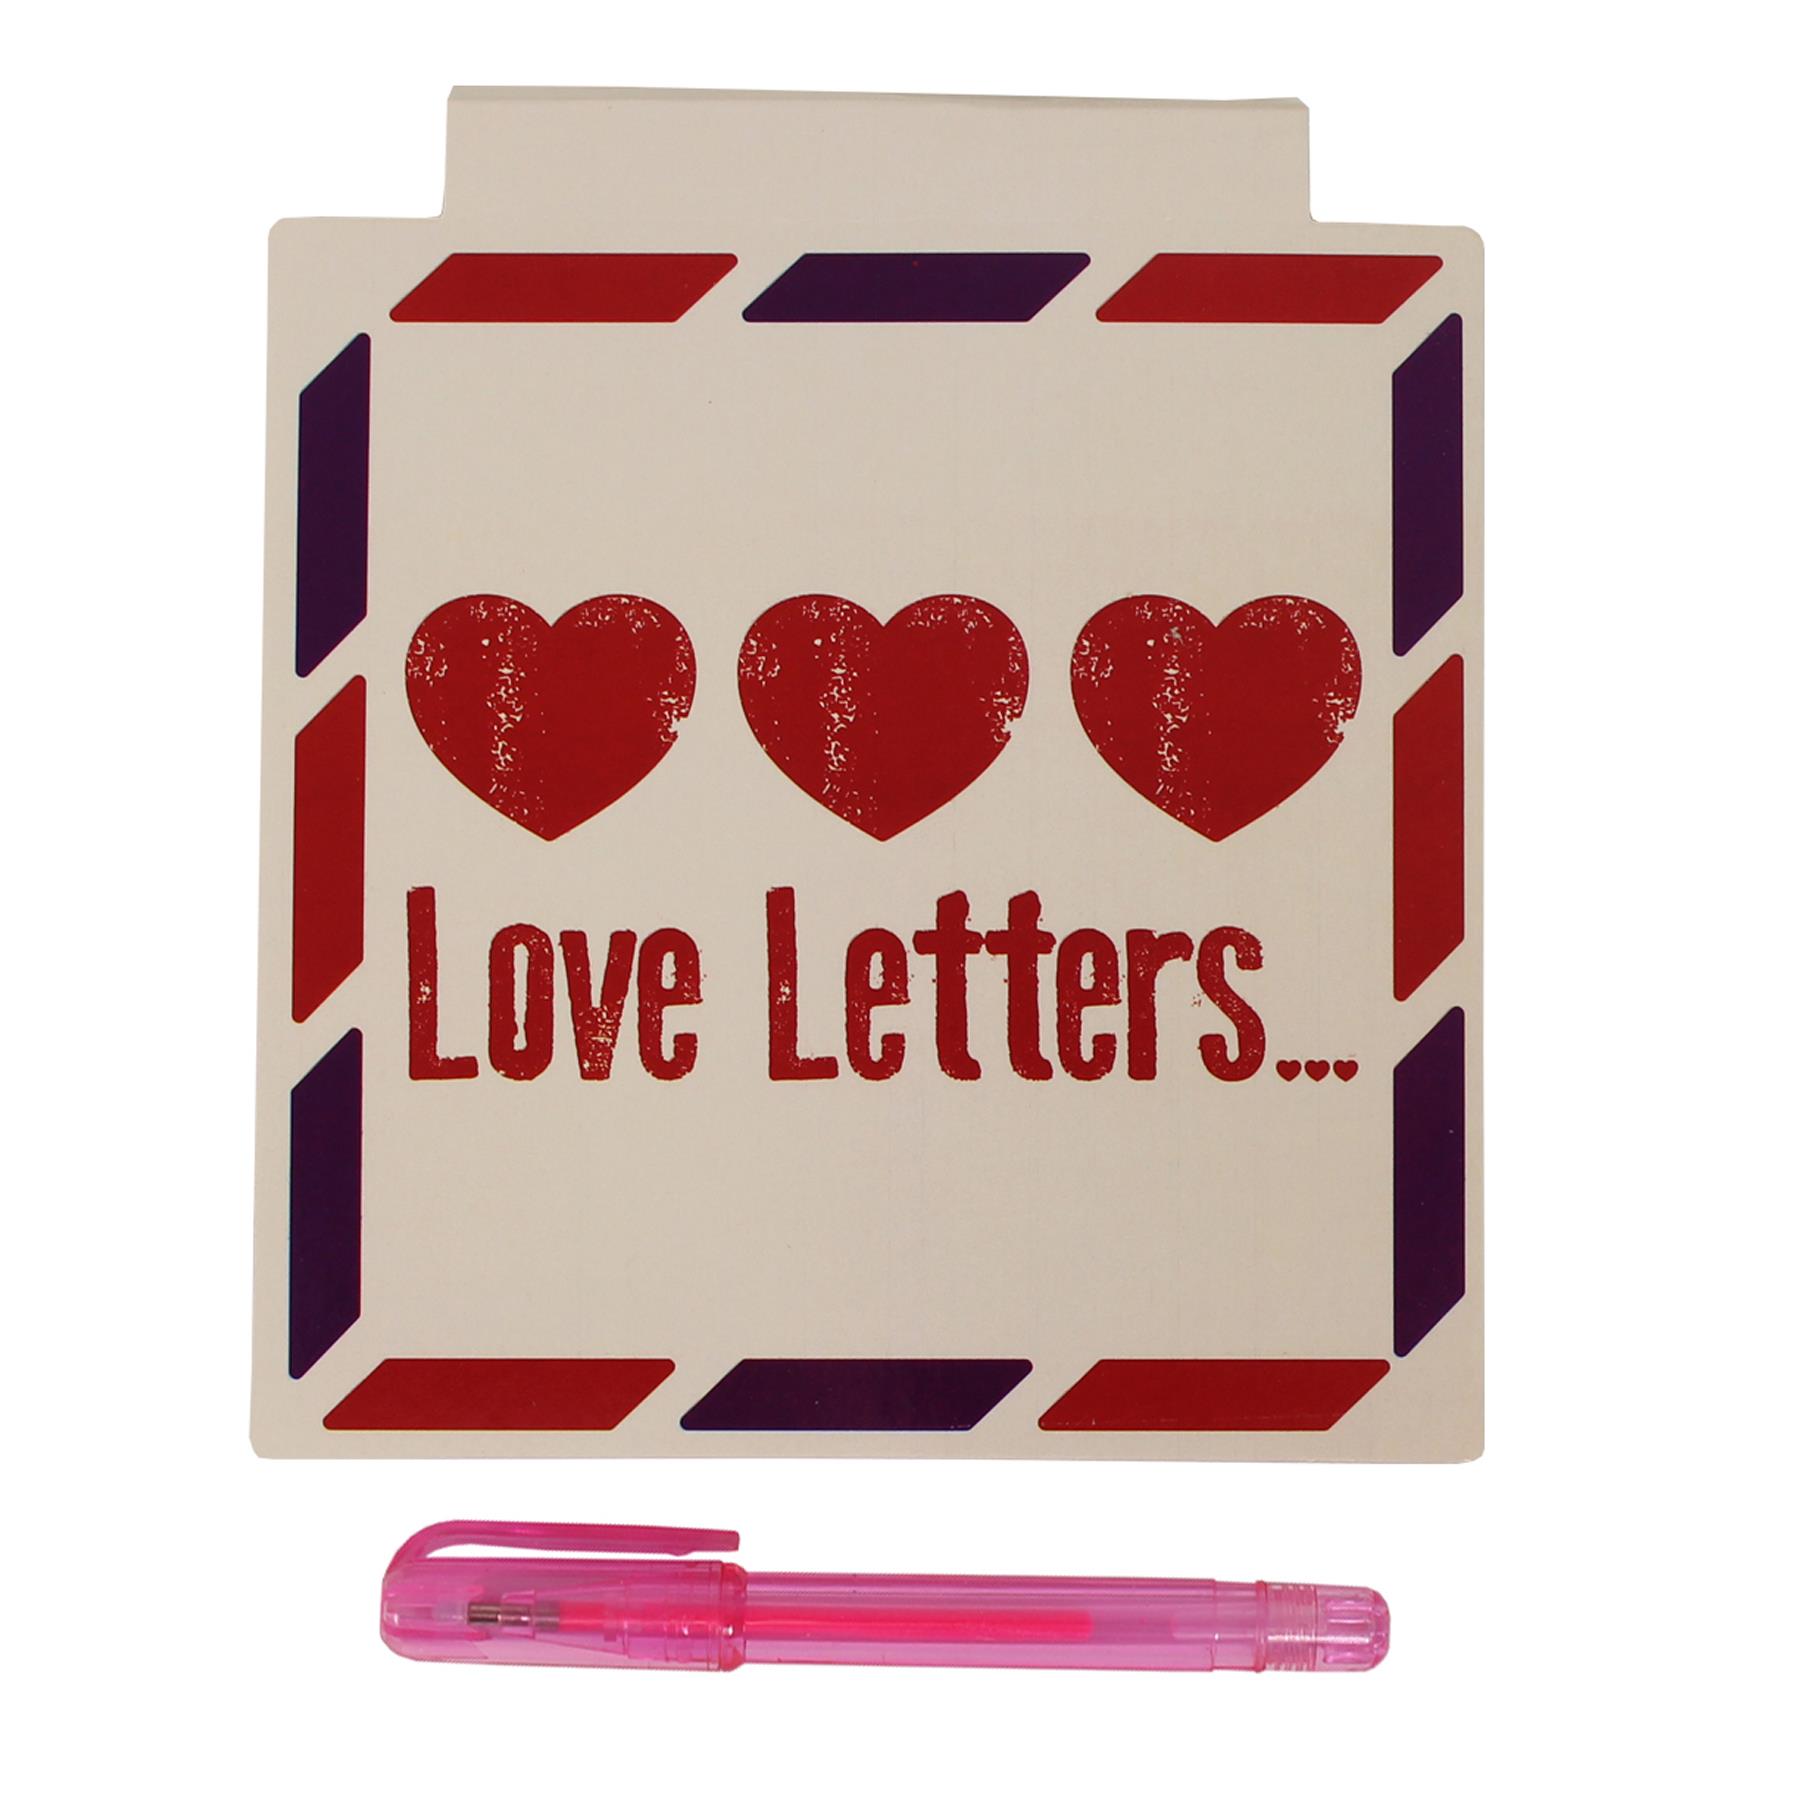 Love Letters Square Notepad and Pen Valentines Day Novelty Gift